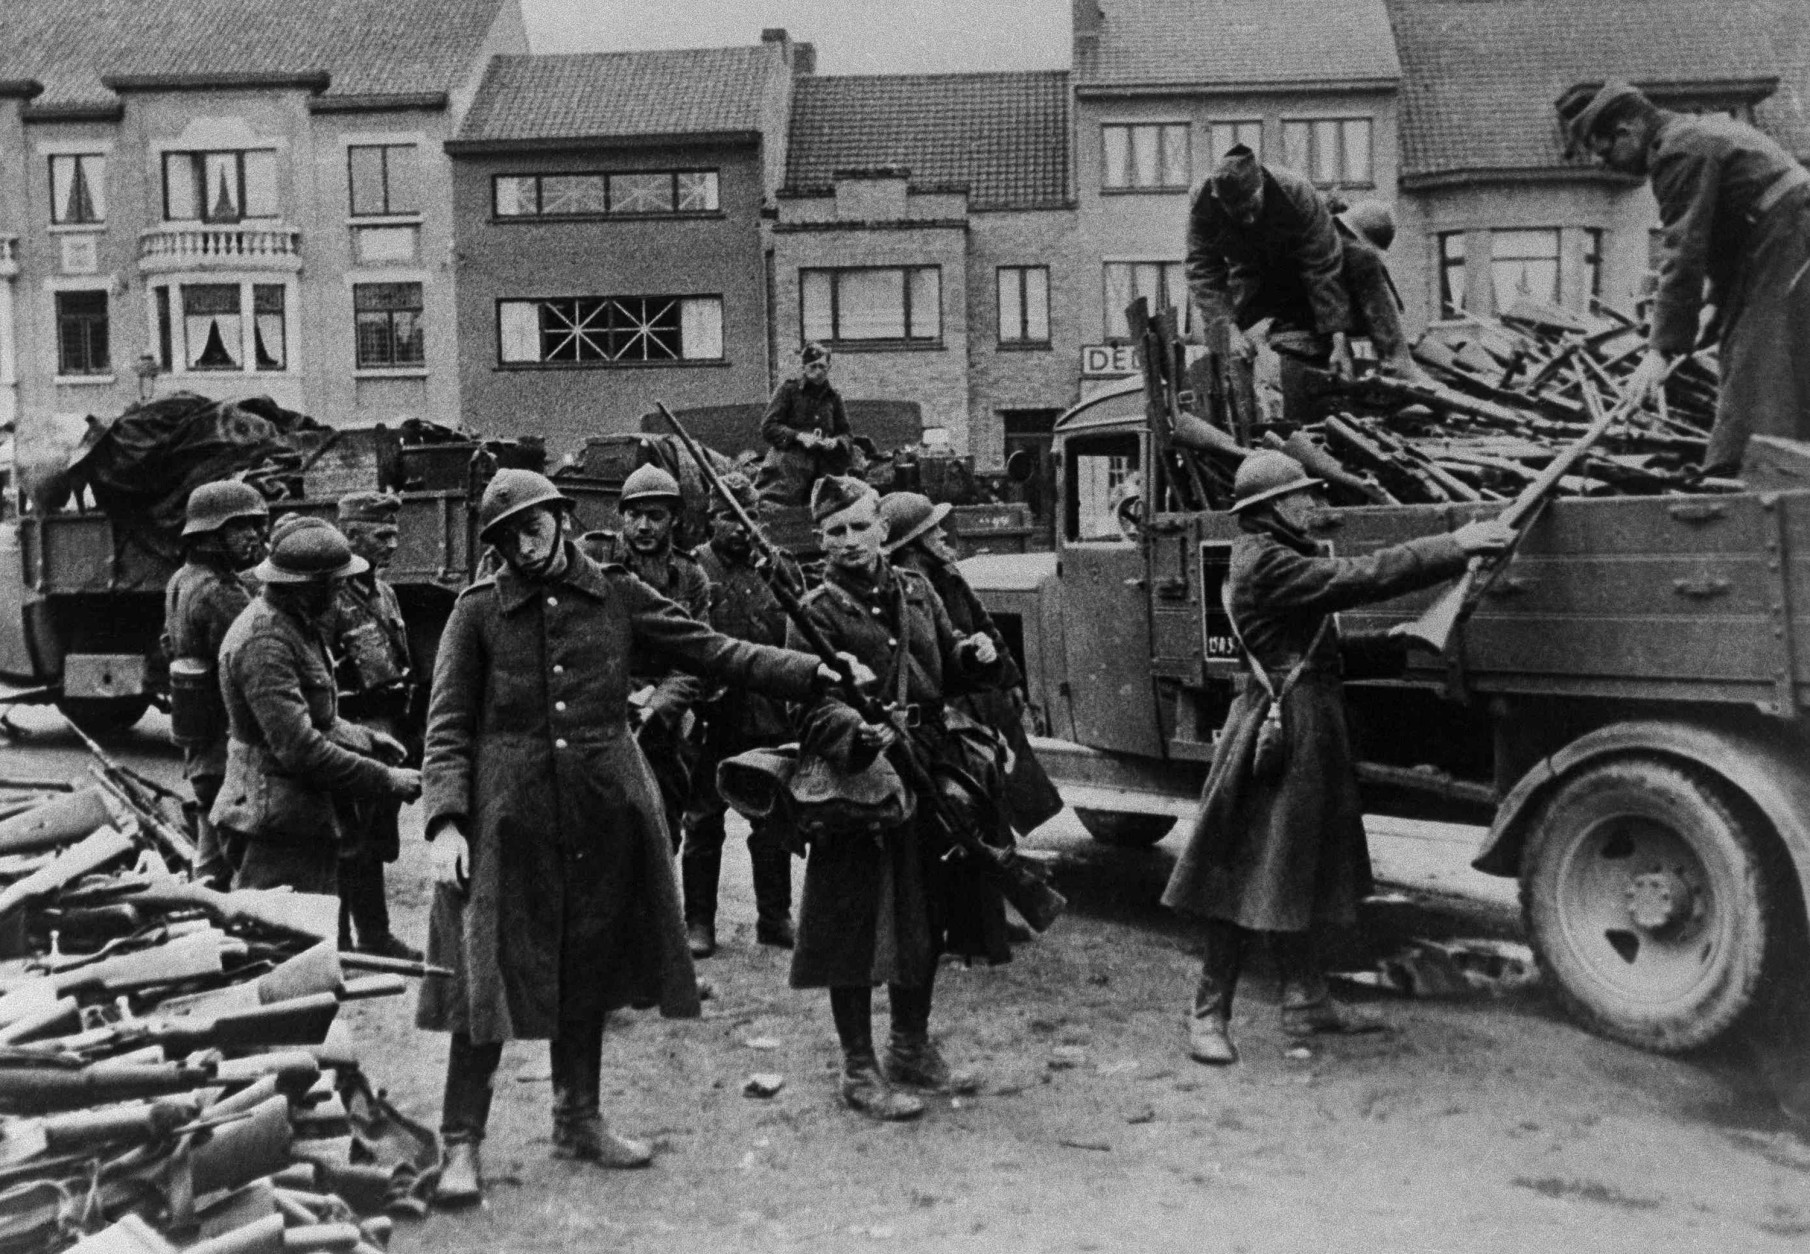 Upon decision of King Leopold 3rd of Belgium, the Belgian army surrendered, May 28, 1940. The disarming of Belgian soldiers the arms are being stacked under German observation. (AP Photo)